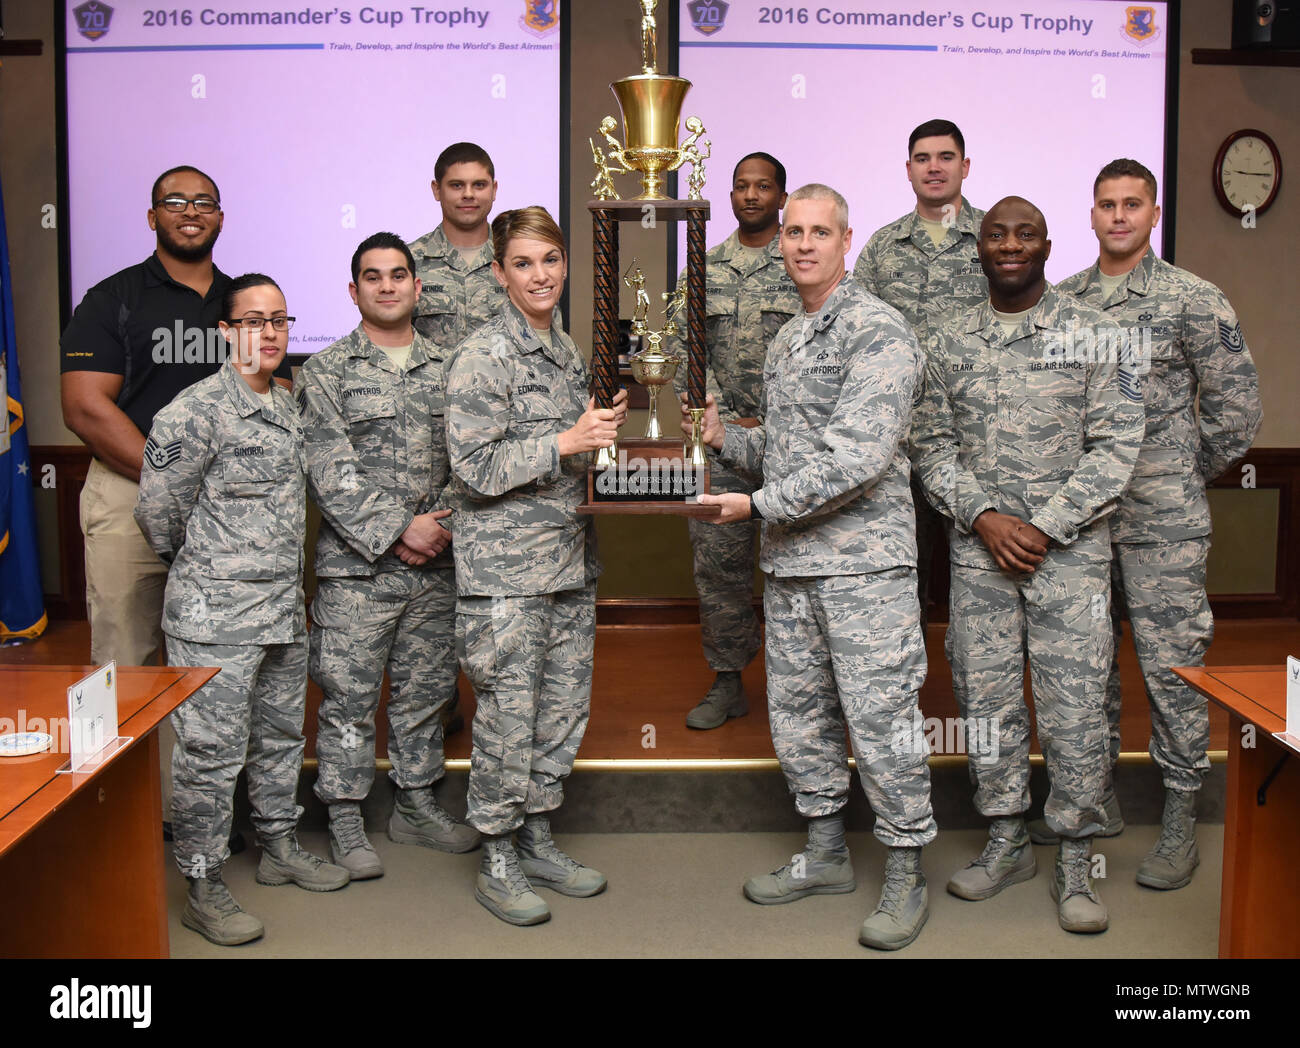 Col. Michele Edmondson, 81st Training Wing commander, presents the Commander’s Trophy to Airmen from the 334th Training Squadron at Stennis Hall Jan. 18, 2017, on Keesler Air Force Base, Miss. Competing squadrons earn points based on their participation in the intramural sports program and special events facilitated by the base fitness centers. This is the 7th consecutive year the “Gators” earned the trophy. (U.S. Air Force photo by Kemberly Groue) Stock Photo